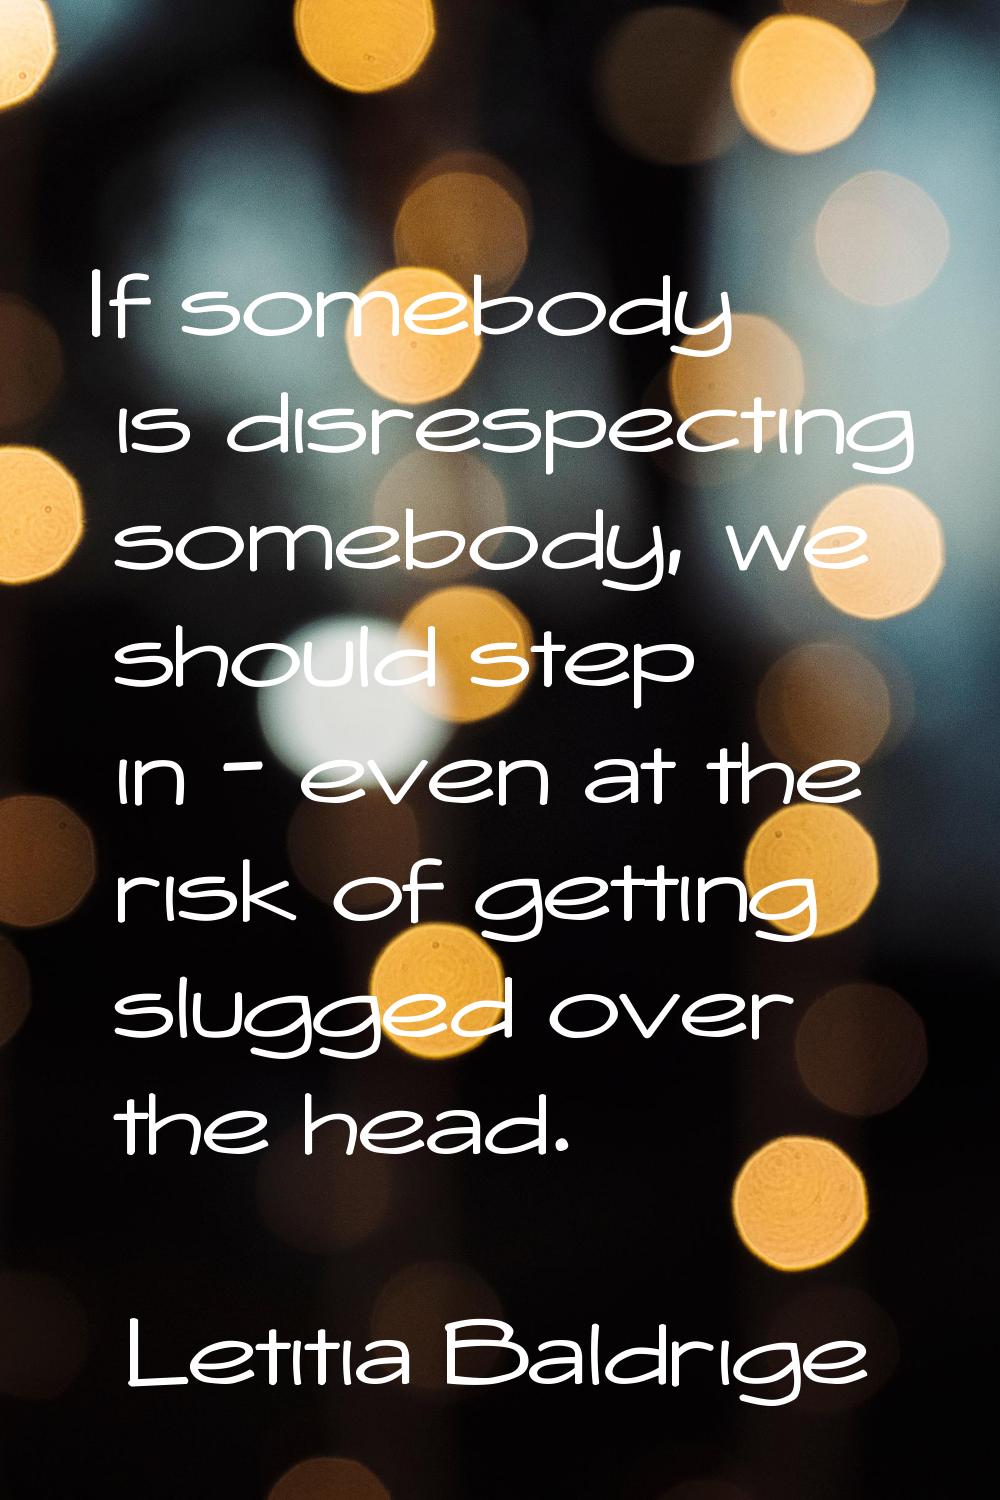 If somebody is disrespecting somebody, we should step in - even at the risk of getting slugged over